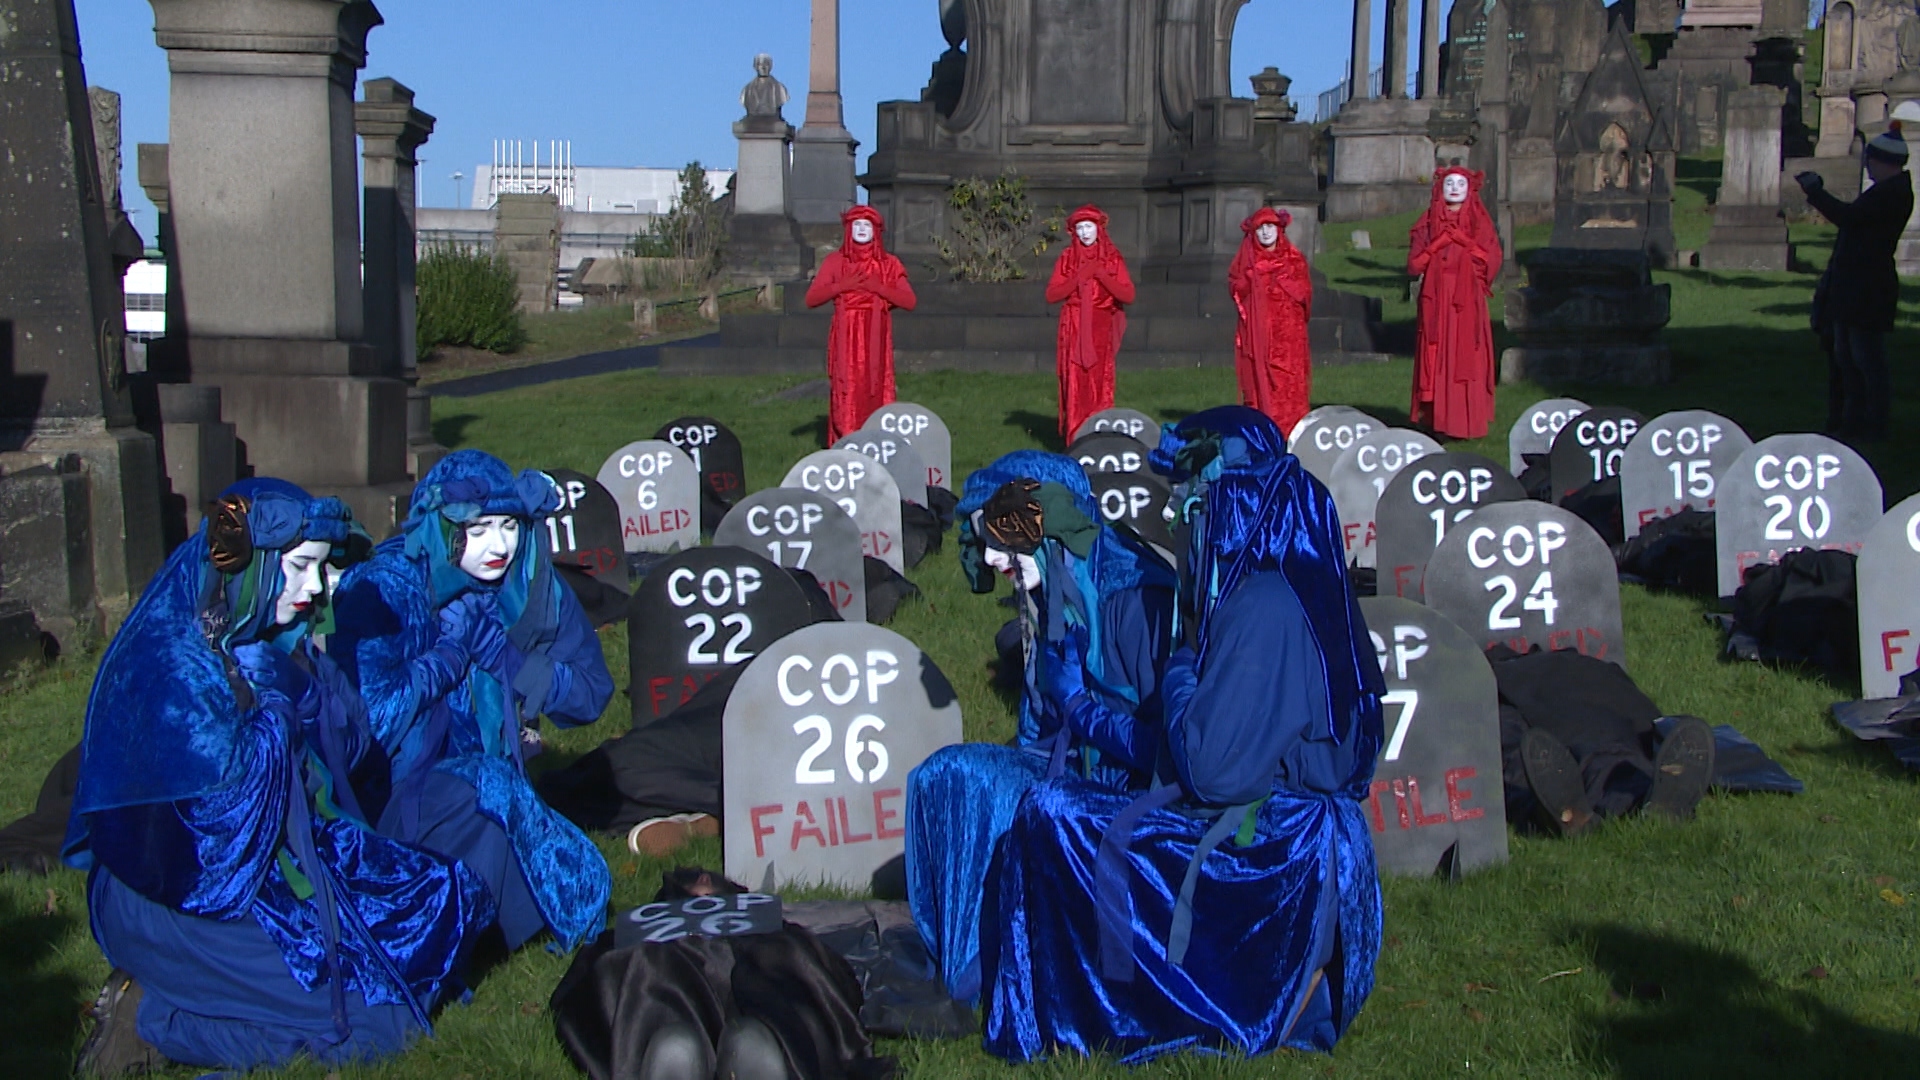 Glasgow: Extinction Rebellion activists held a protest at the city's Necropolis on Saturday.